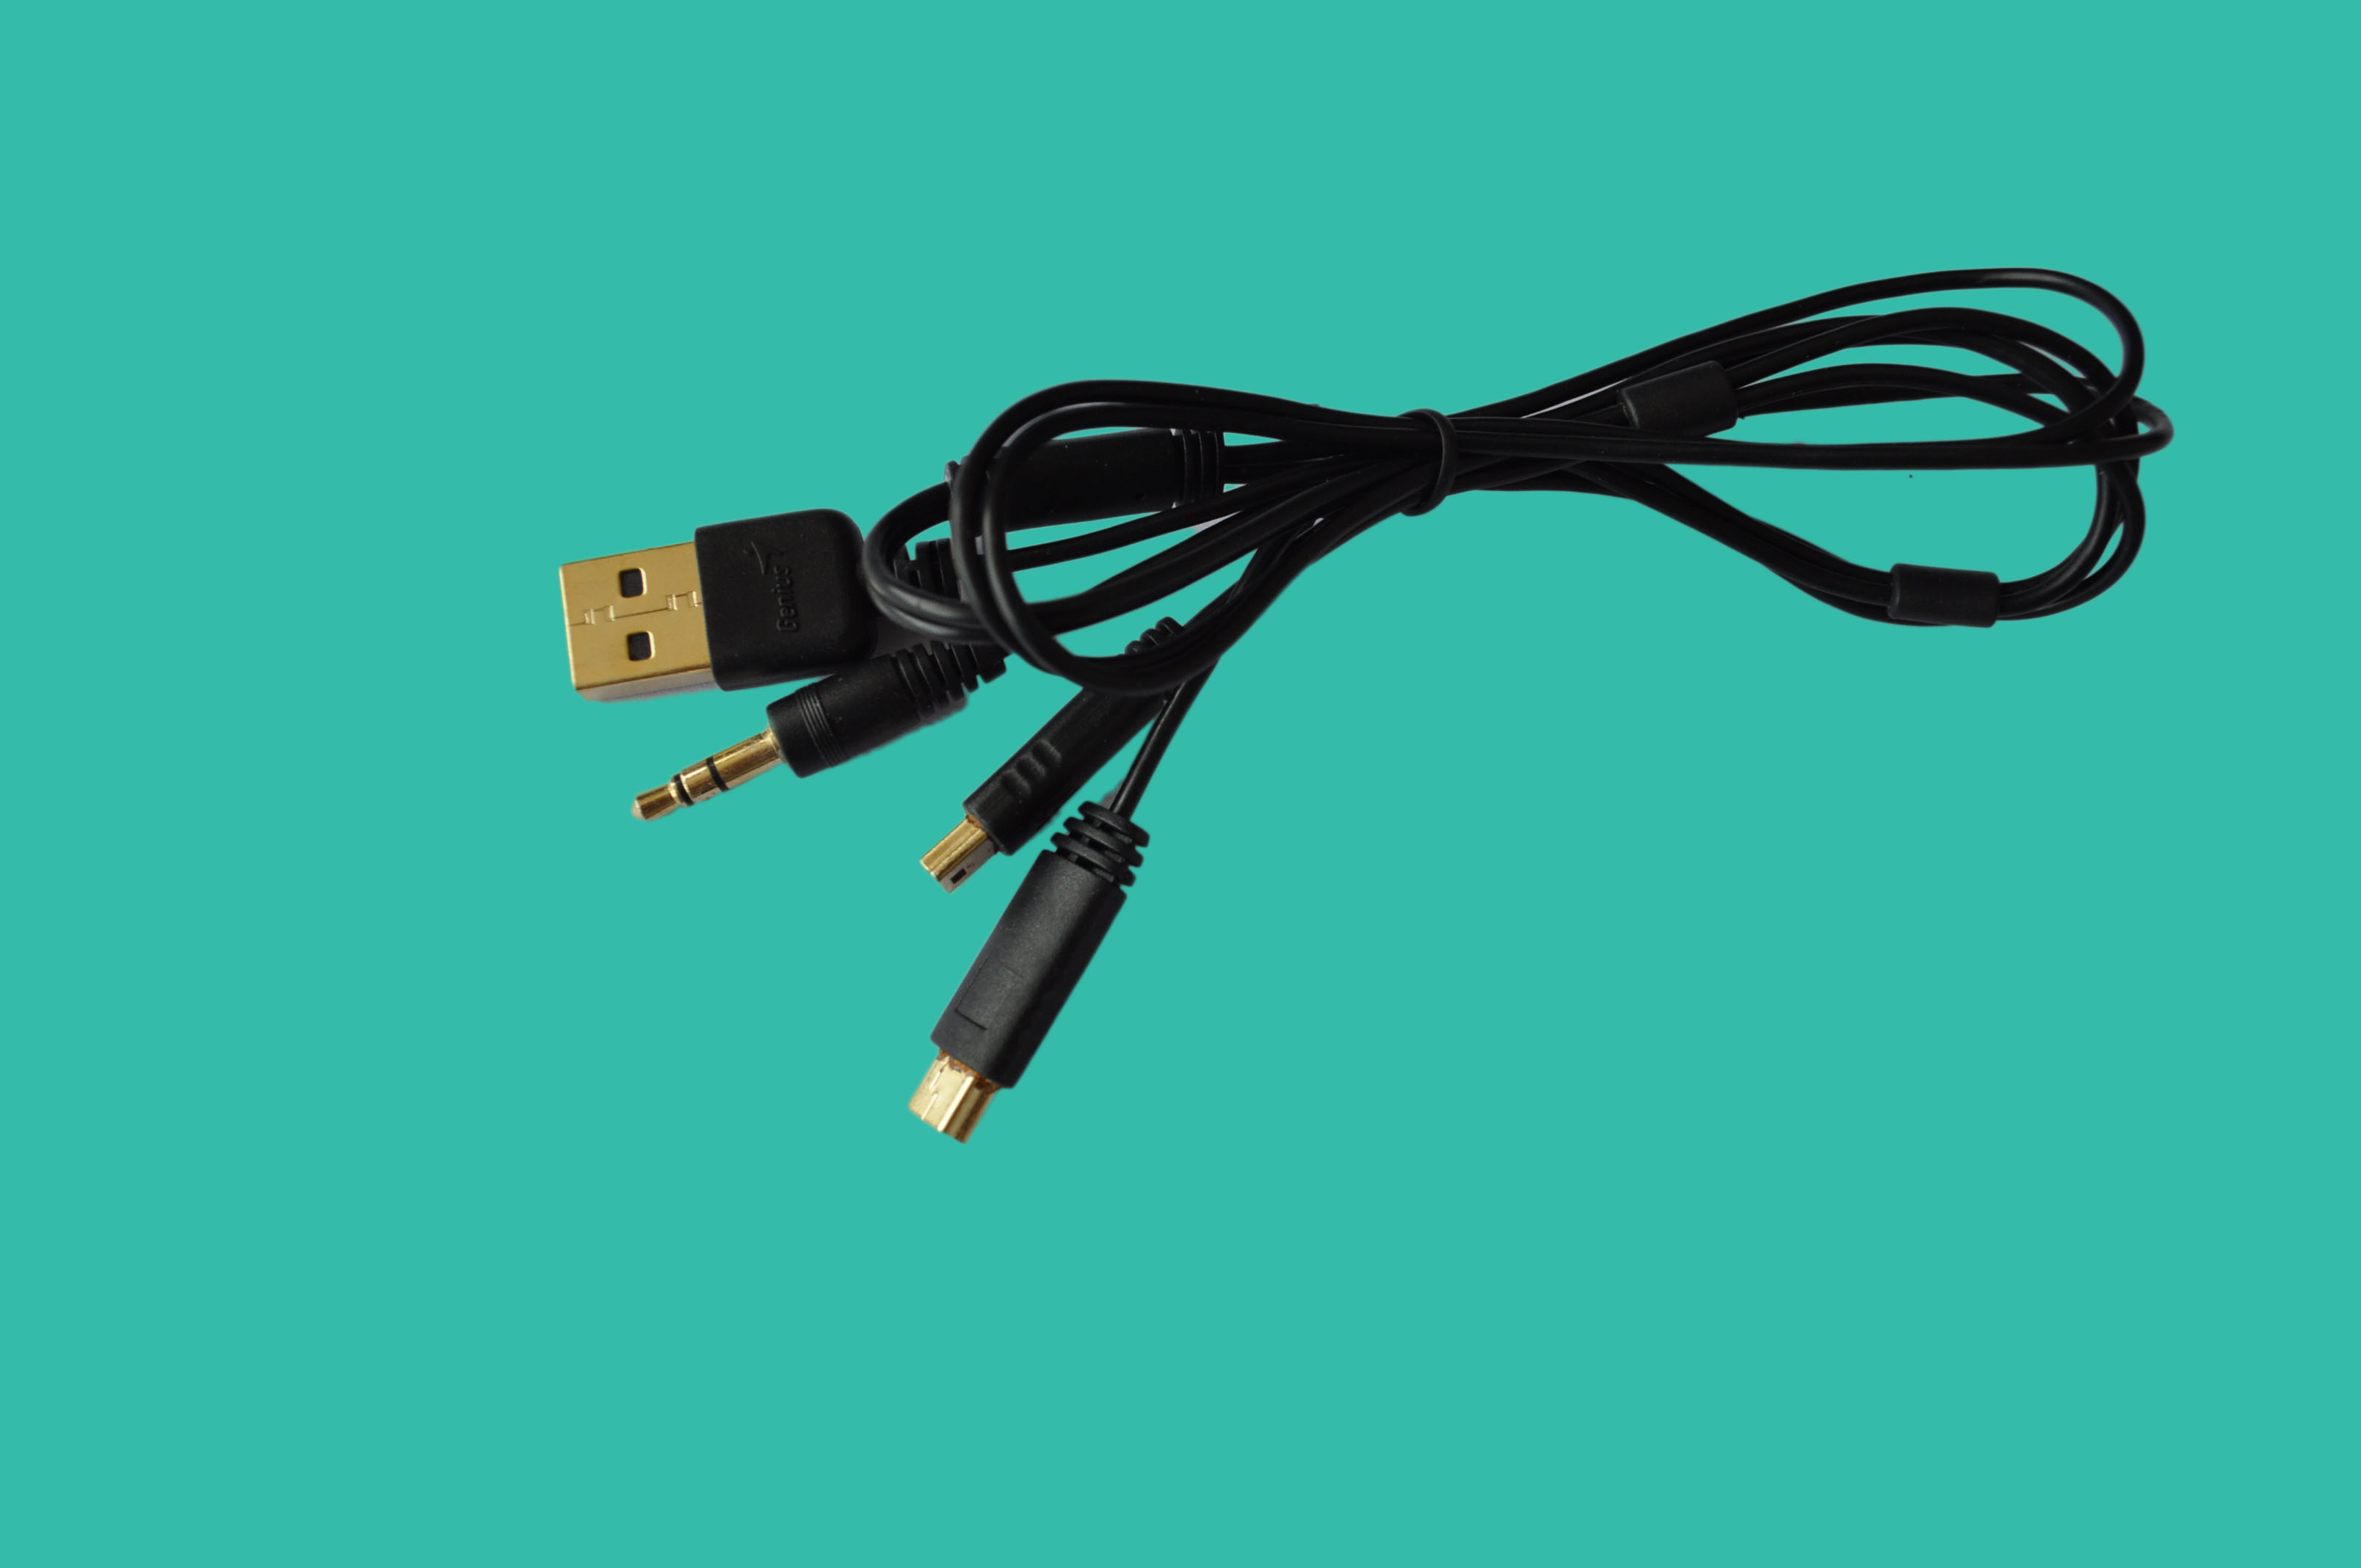 USB cable for charger cable